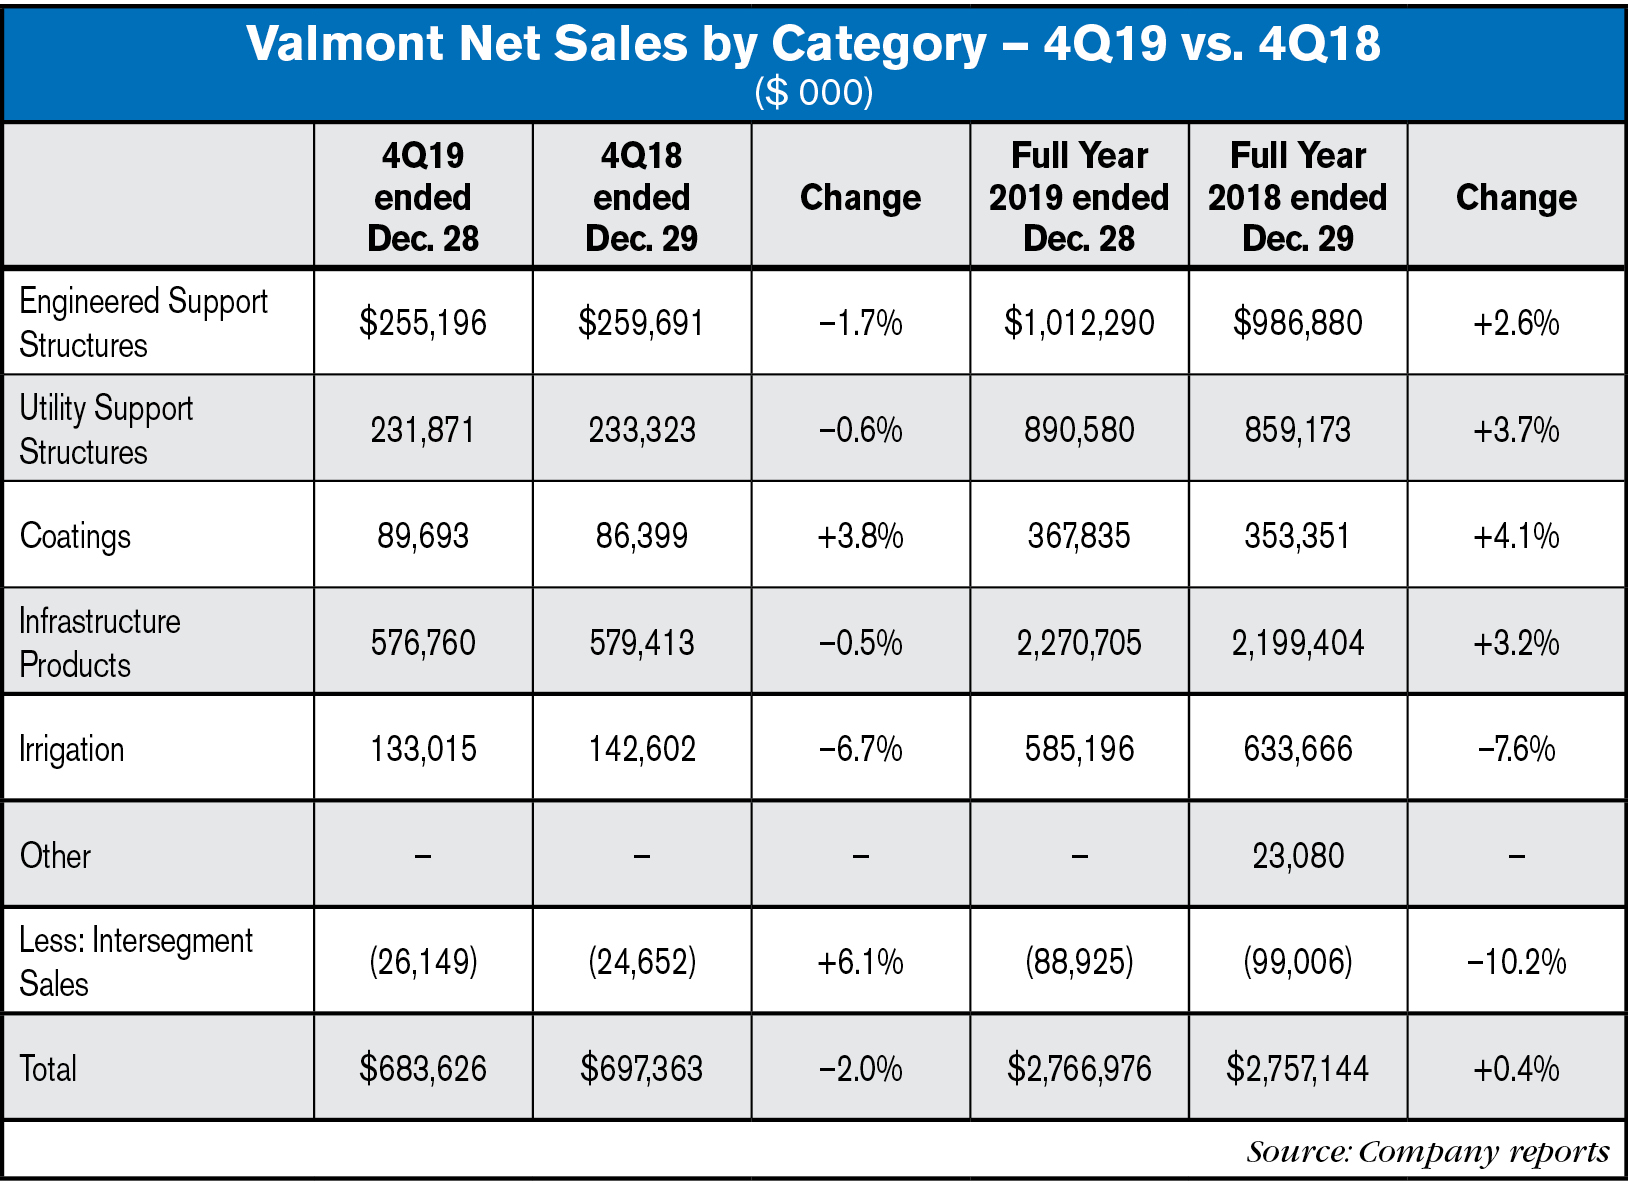 Valmont net Sales by Category Full Year 2019